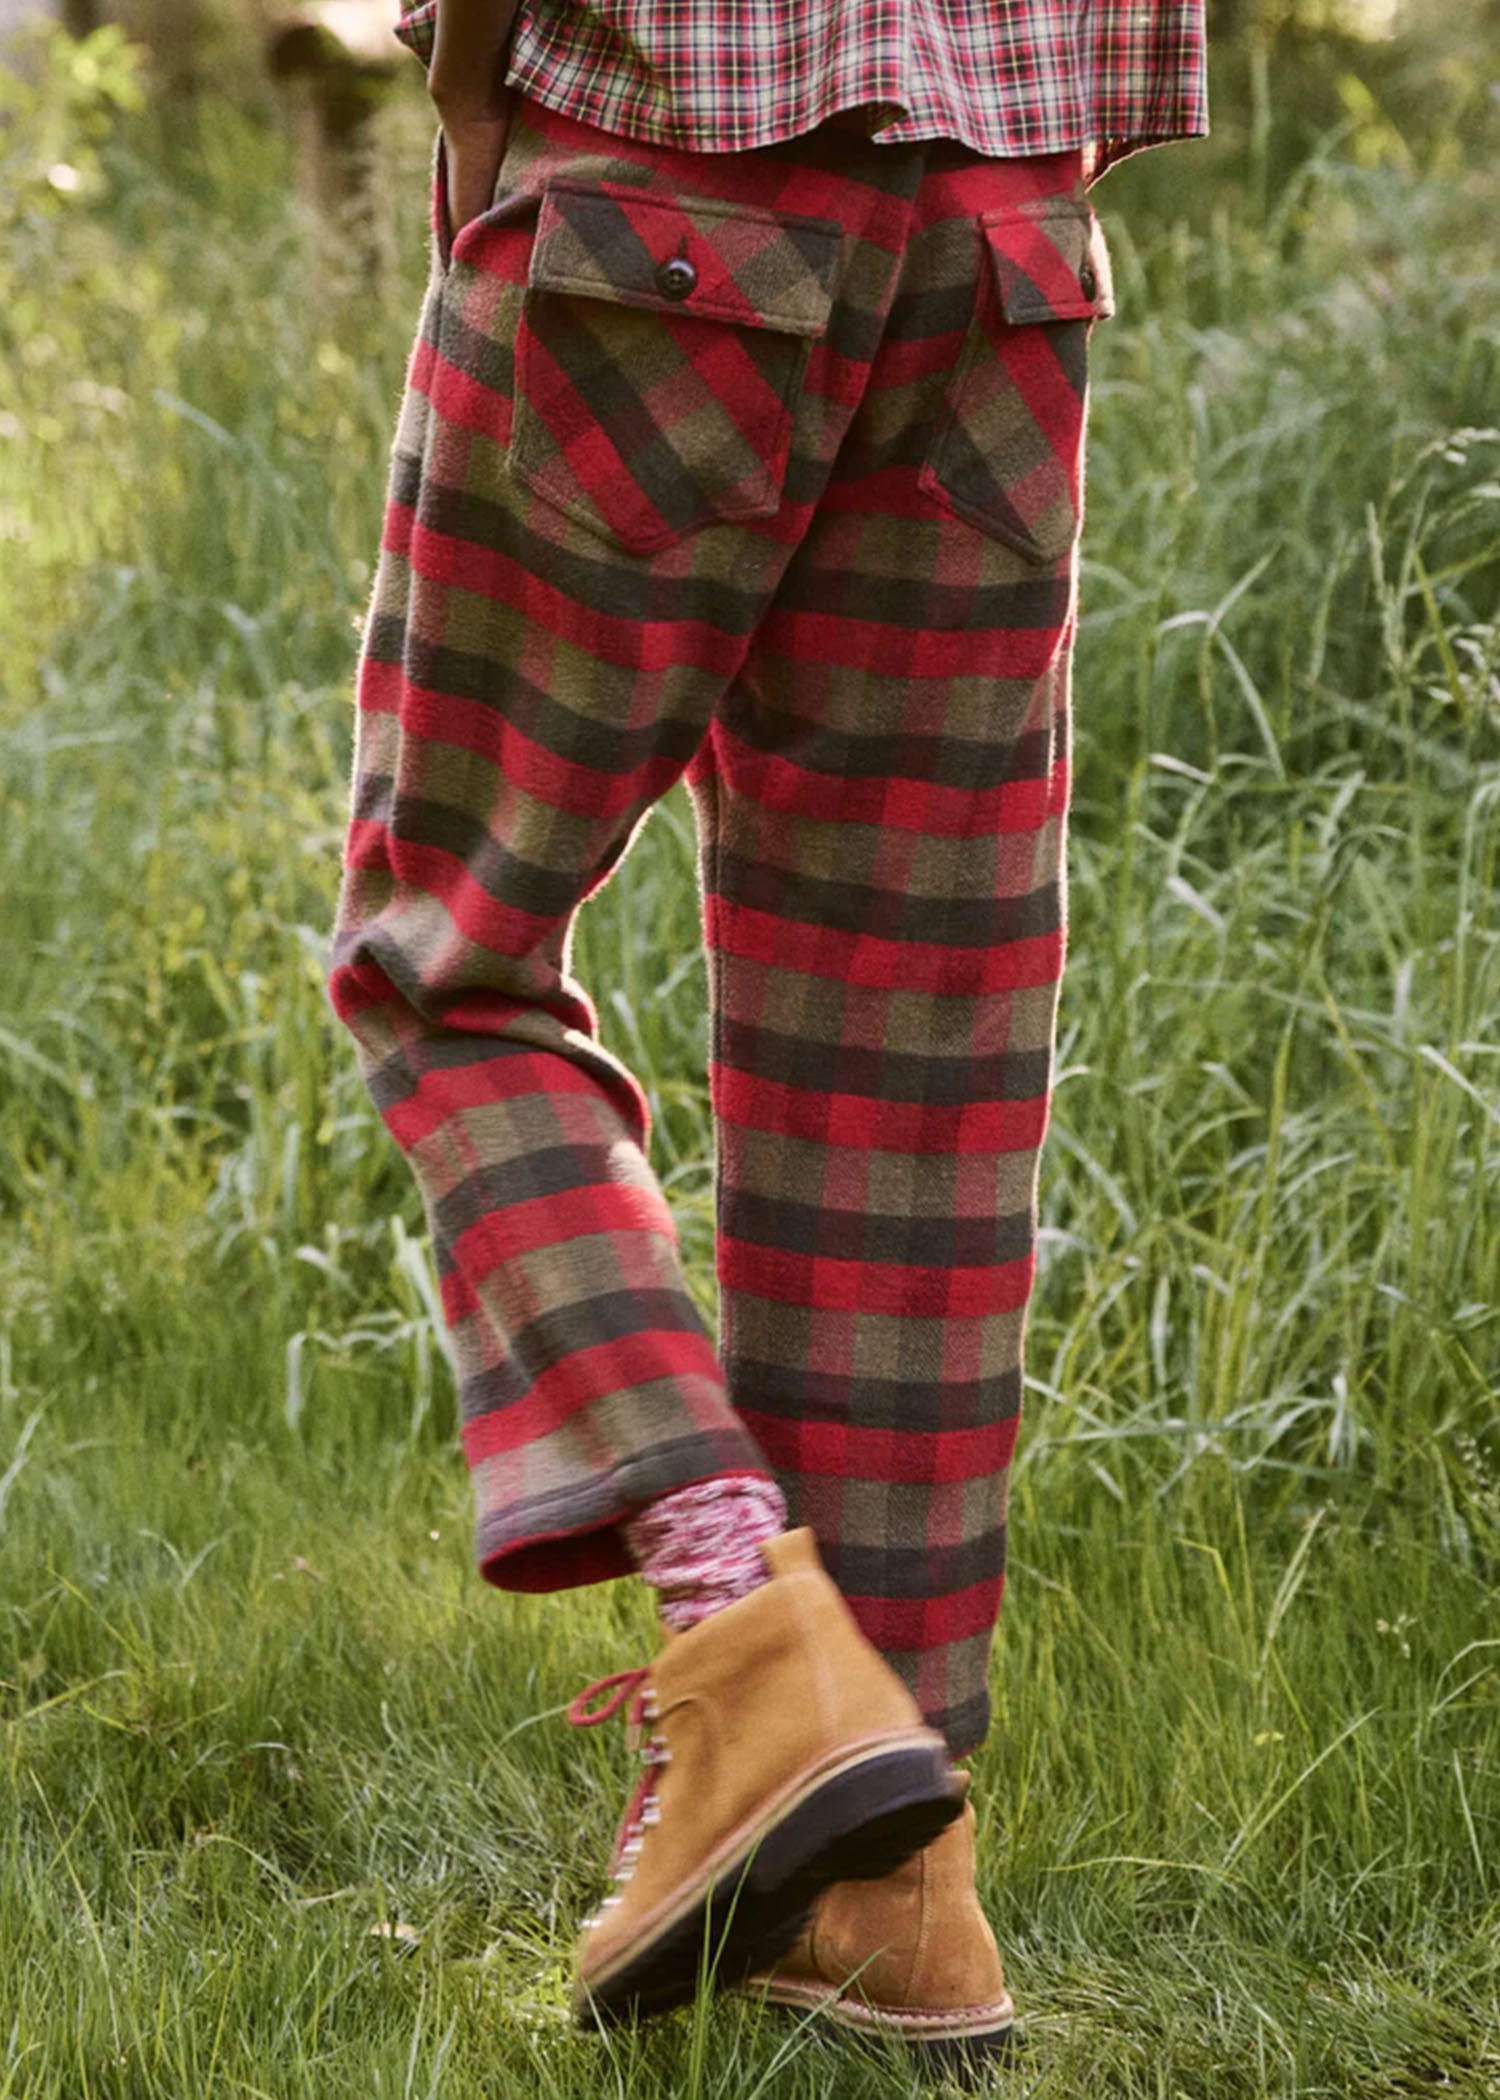 This-Is-The-Great-The-Ranger-Pant-Wood-Shed-Plaid